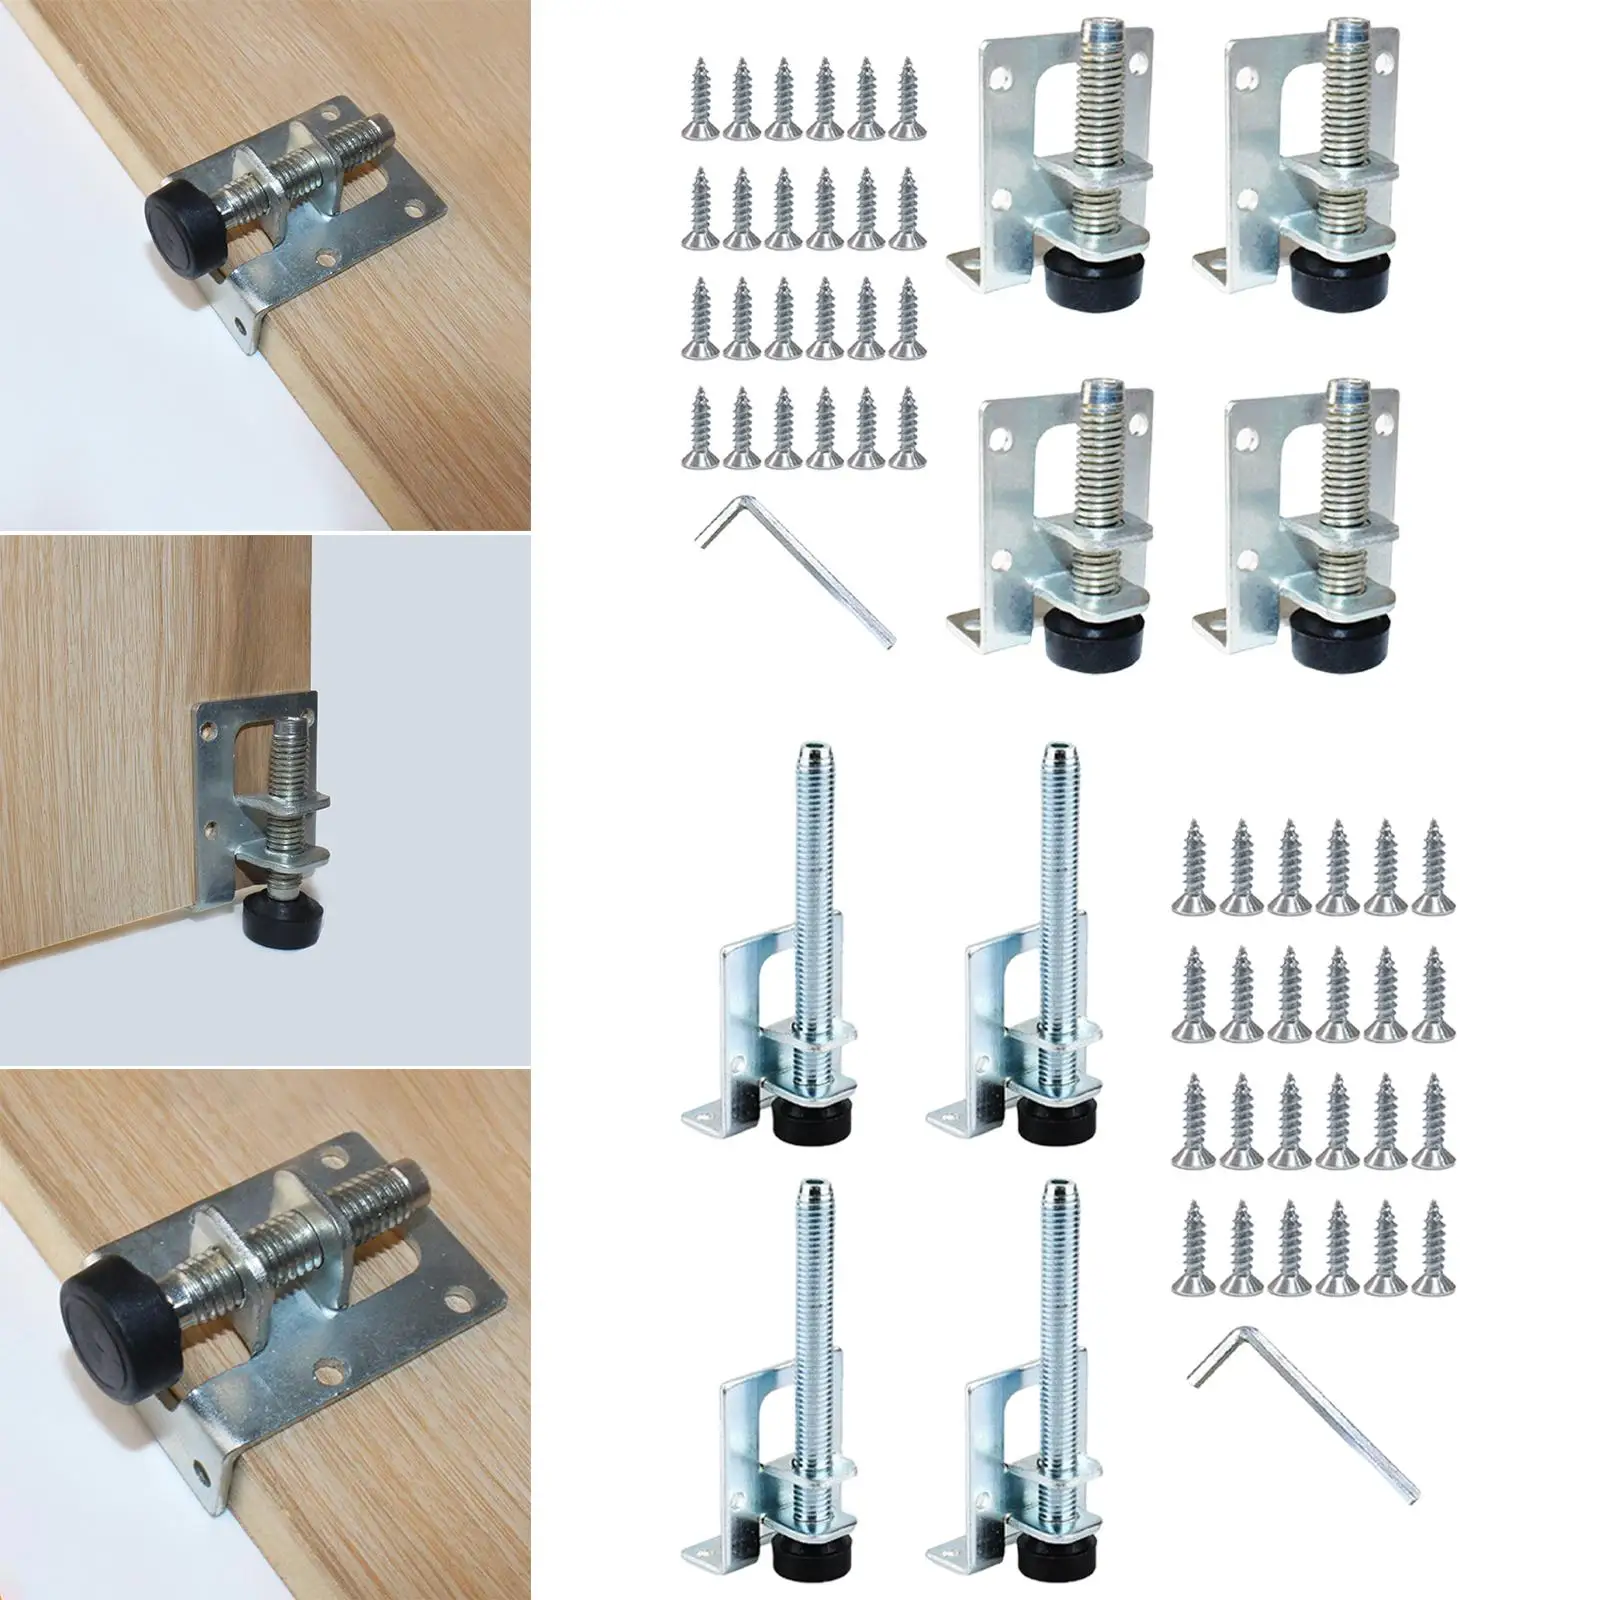 4 Packs Furniture Leveler Legs Height Adjustable Leveling Feet Durable Bracket Support Feet for Cabinet Bed Couch Sofa Hardware